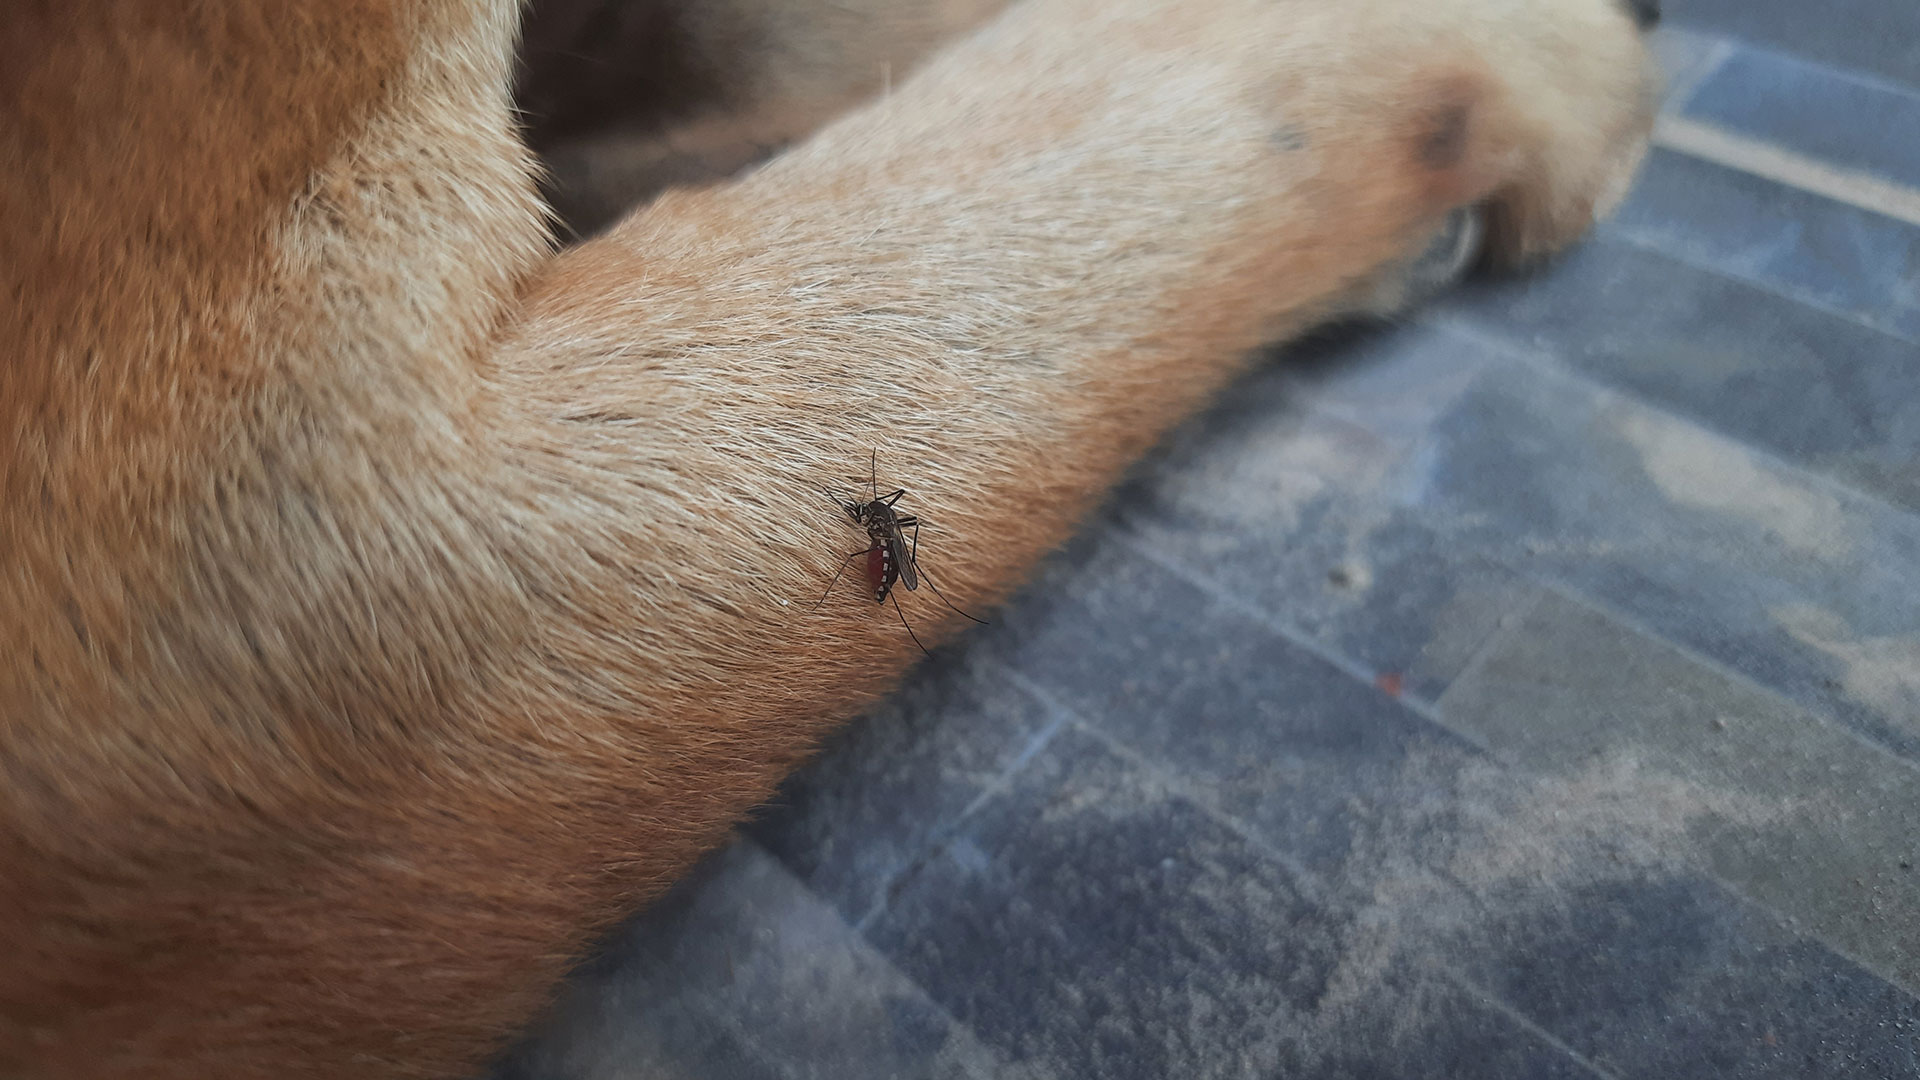 A mosquito biting a pet in Hermitage, TN.